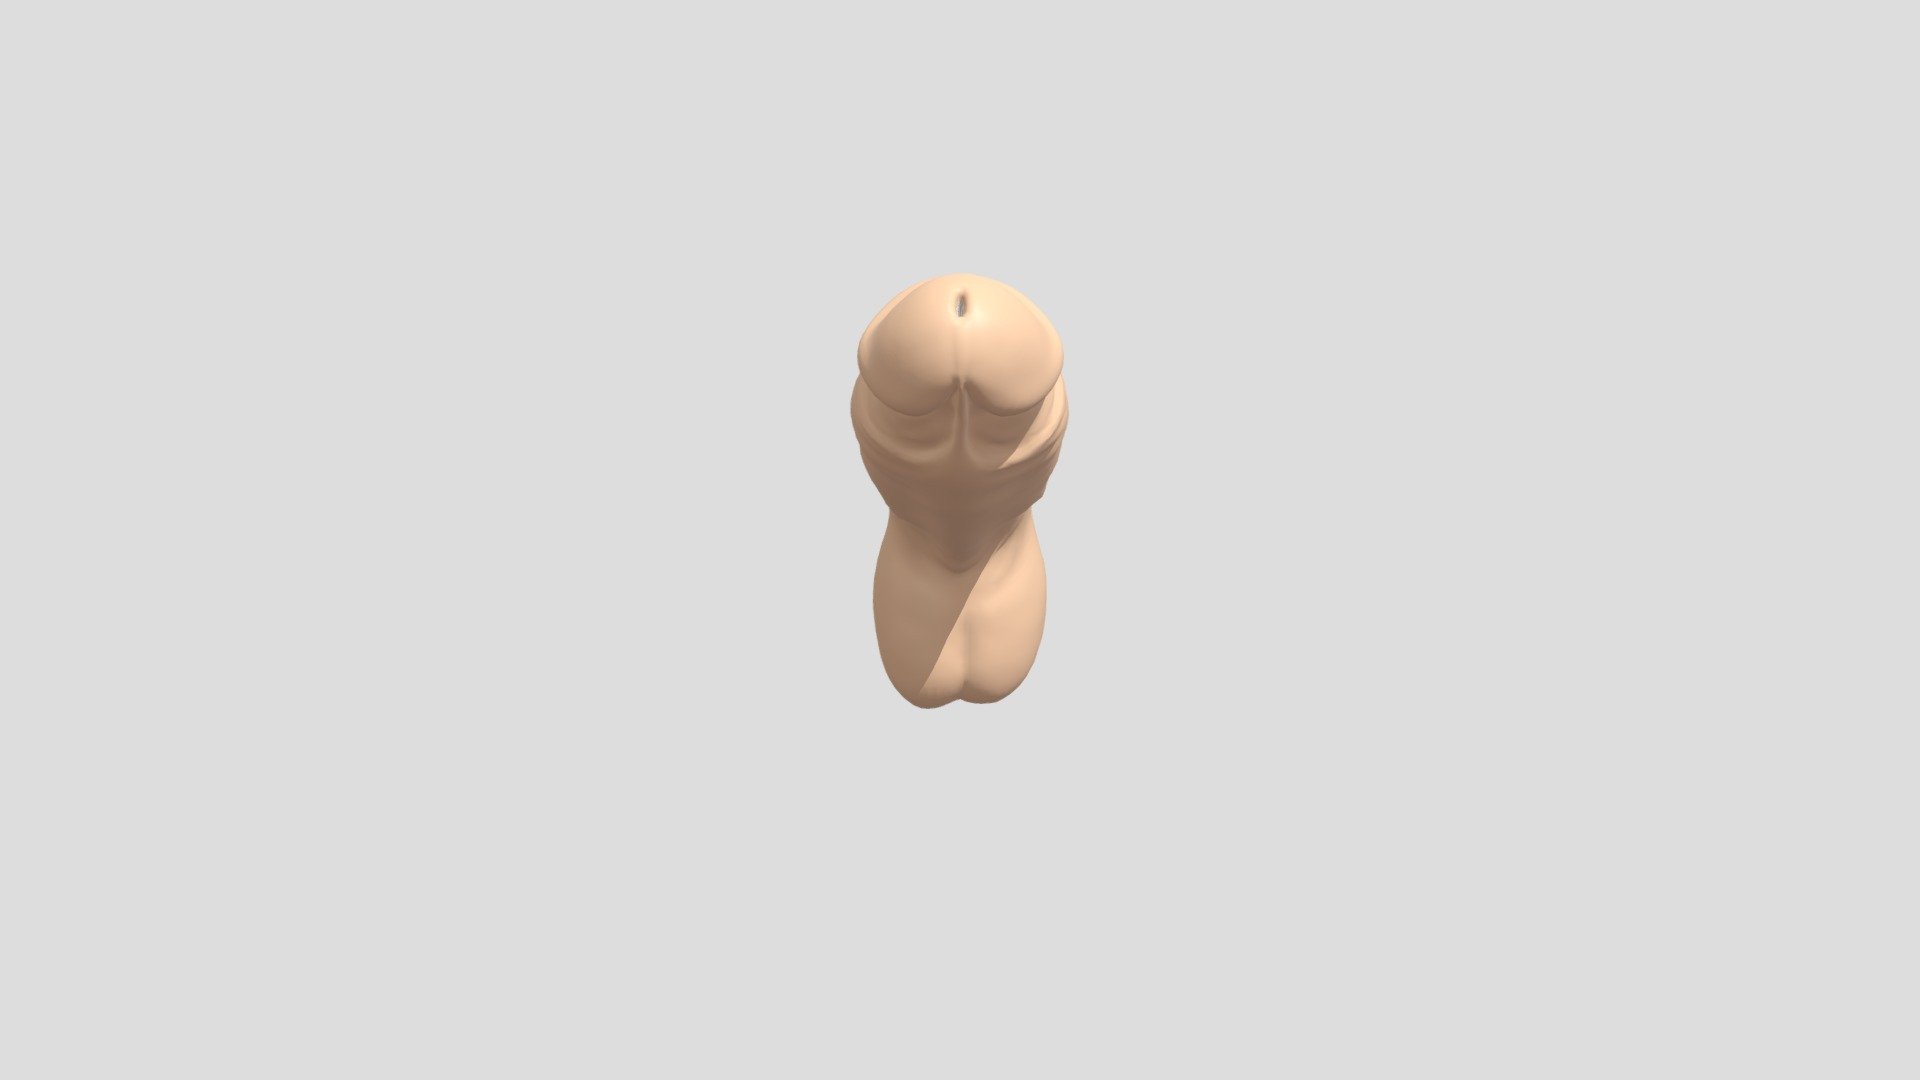 A stand alone penis model available to attach to male characters created by urgarulga. link to his tumblr https://www.tumblr.com/urgarulga?redirect_to=%2Furgarulga&amp;source=content_warning_wall

link on smutbase 
https://smutba.se/project/15/ - Big Penis Stand Alone Model 1 - Download Free 3D model by sleazyrick 3d model